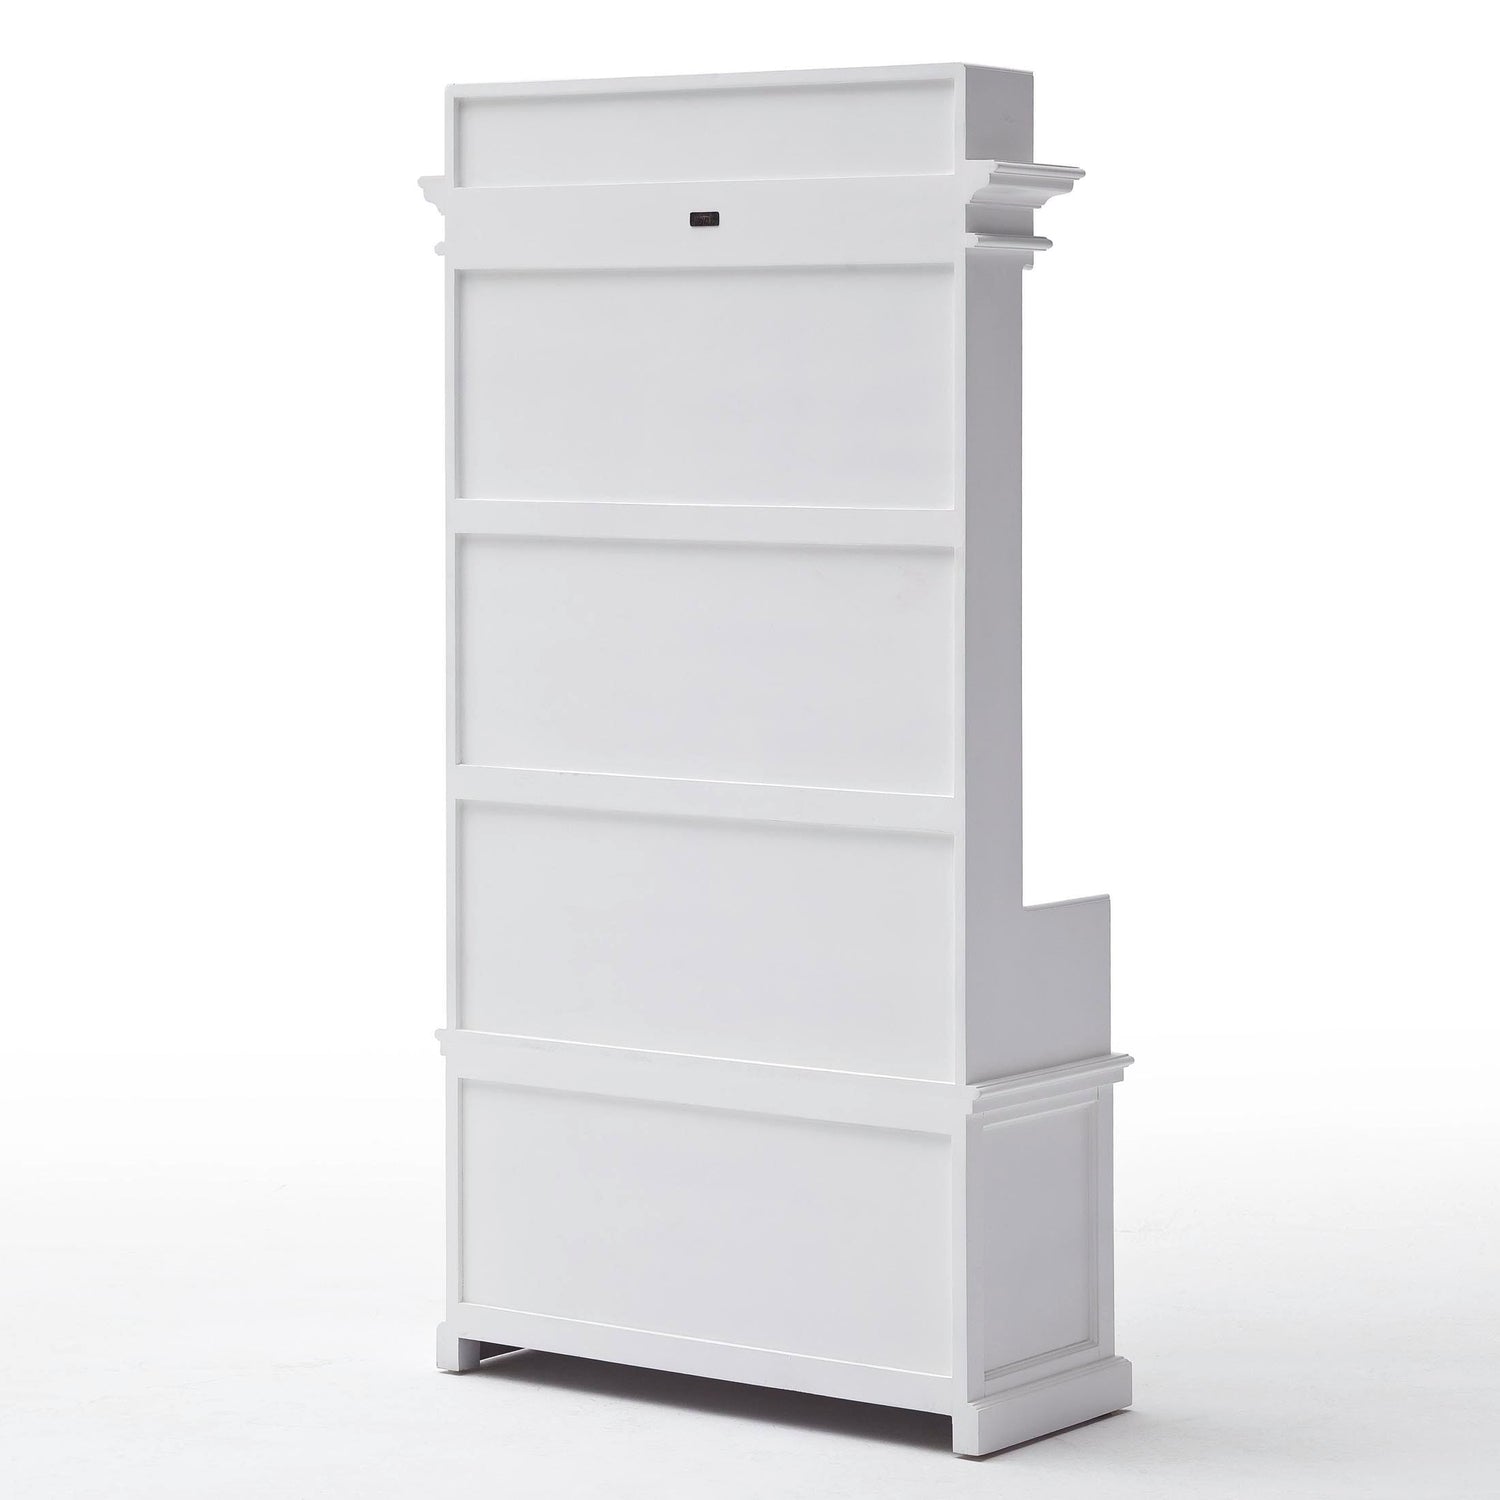 Halifax entrance furniture with drawers